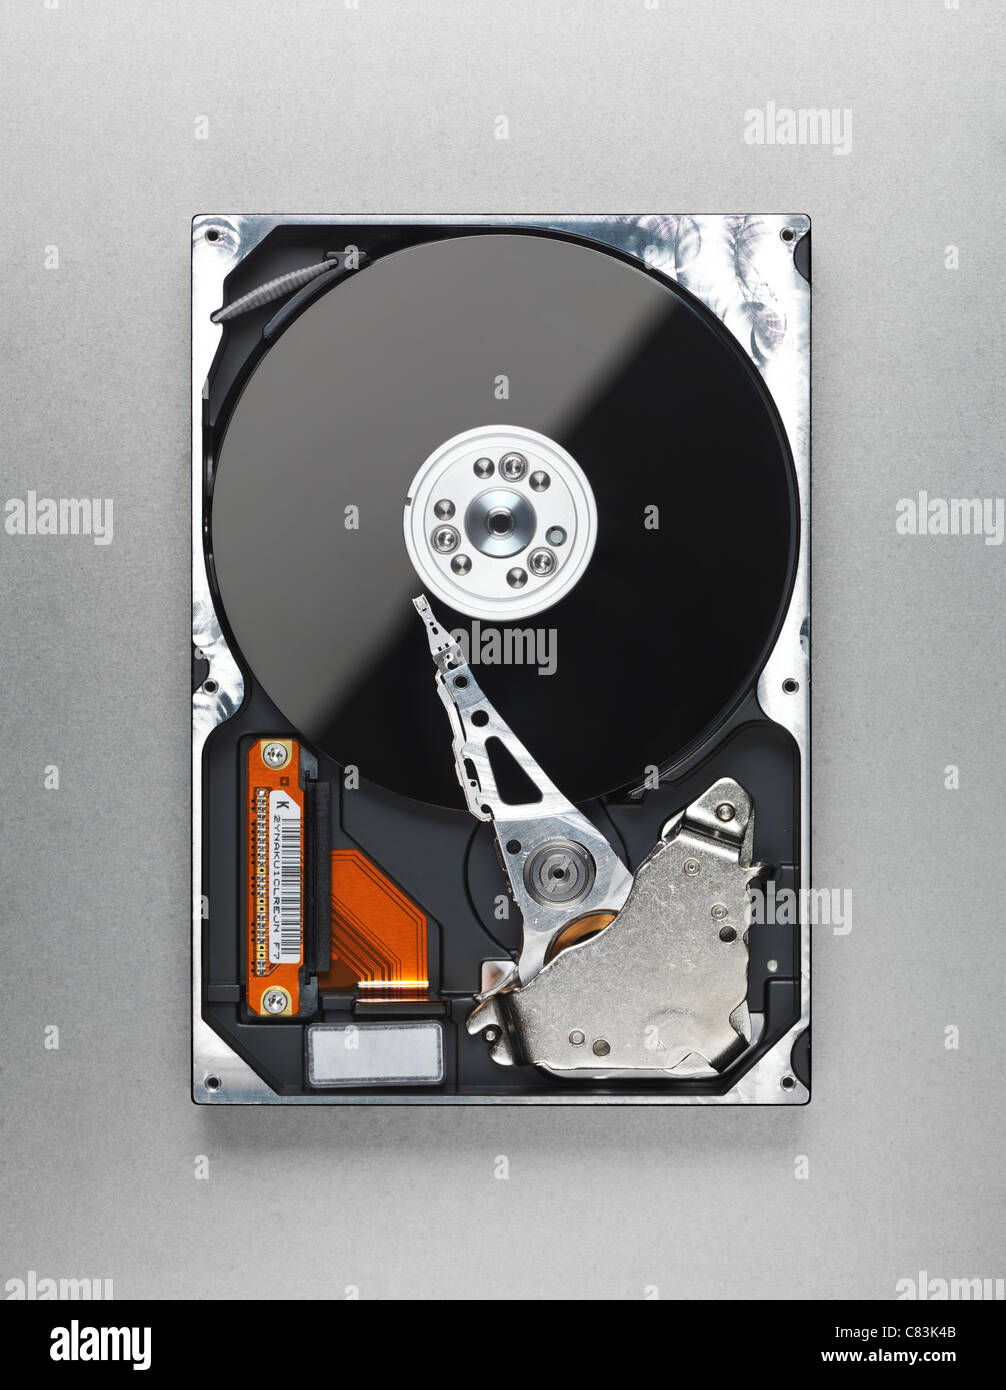 Open computer hard disk drive HDD isolated on metallic background Stock Photo